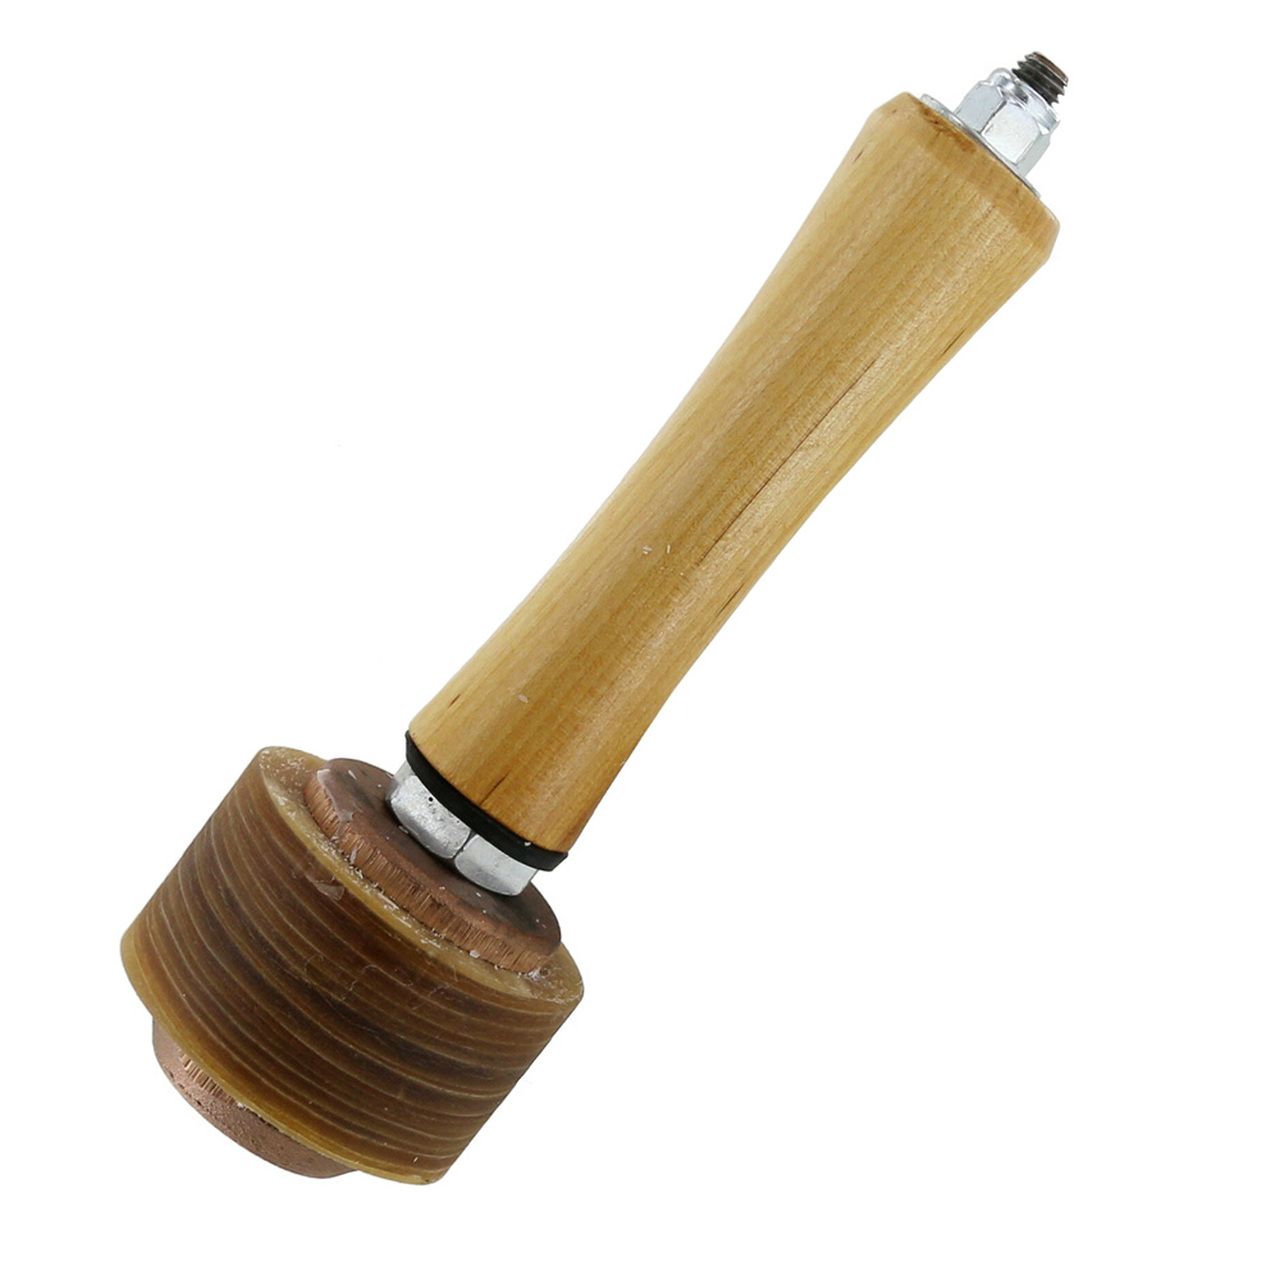  Leather Carving Hammer Mallet, Leather Working Rawhide Mallet,  Leathercraft Mallet, Leather Maul, DIY Leathercraft Mallet, Nylon Wood  Handle Hammer : Tools & Home Improvement